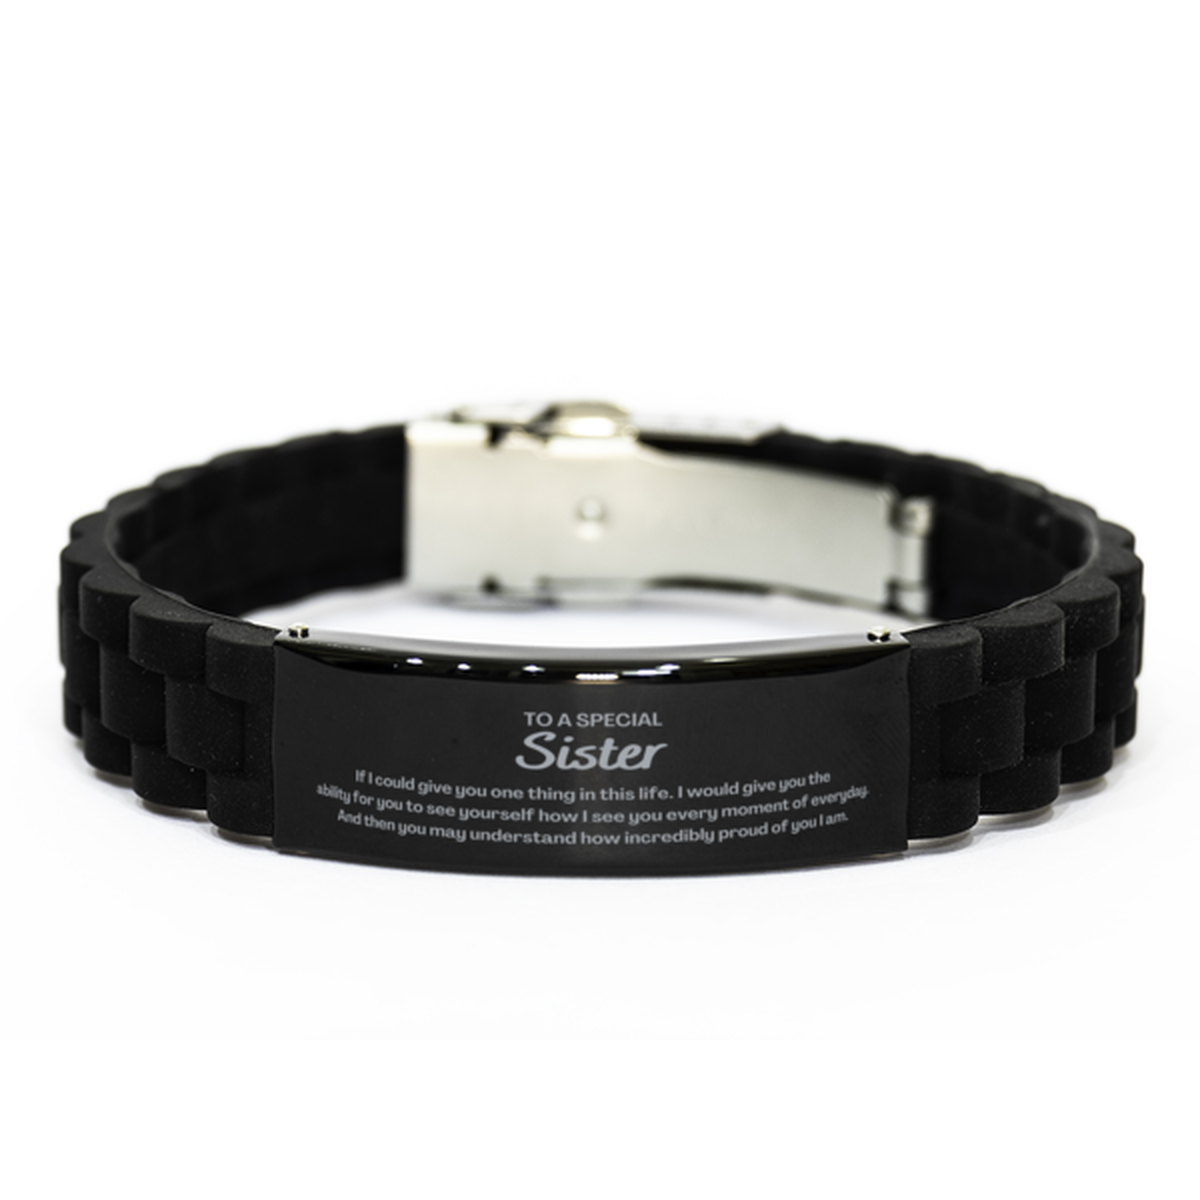 To My Sister Black Glidelock Clasp Bracelet, Gifts For Sister Engraved, Inspirational Gifts for Christmas Birthday, Epic Gifts for Sister To A Special Sister how incredibly proud of you I am